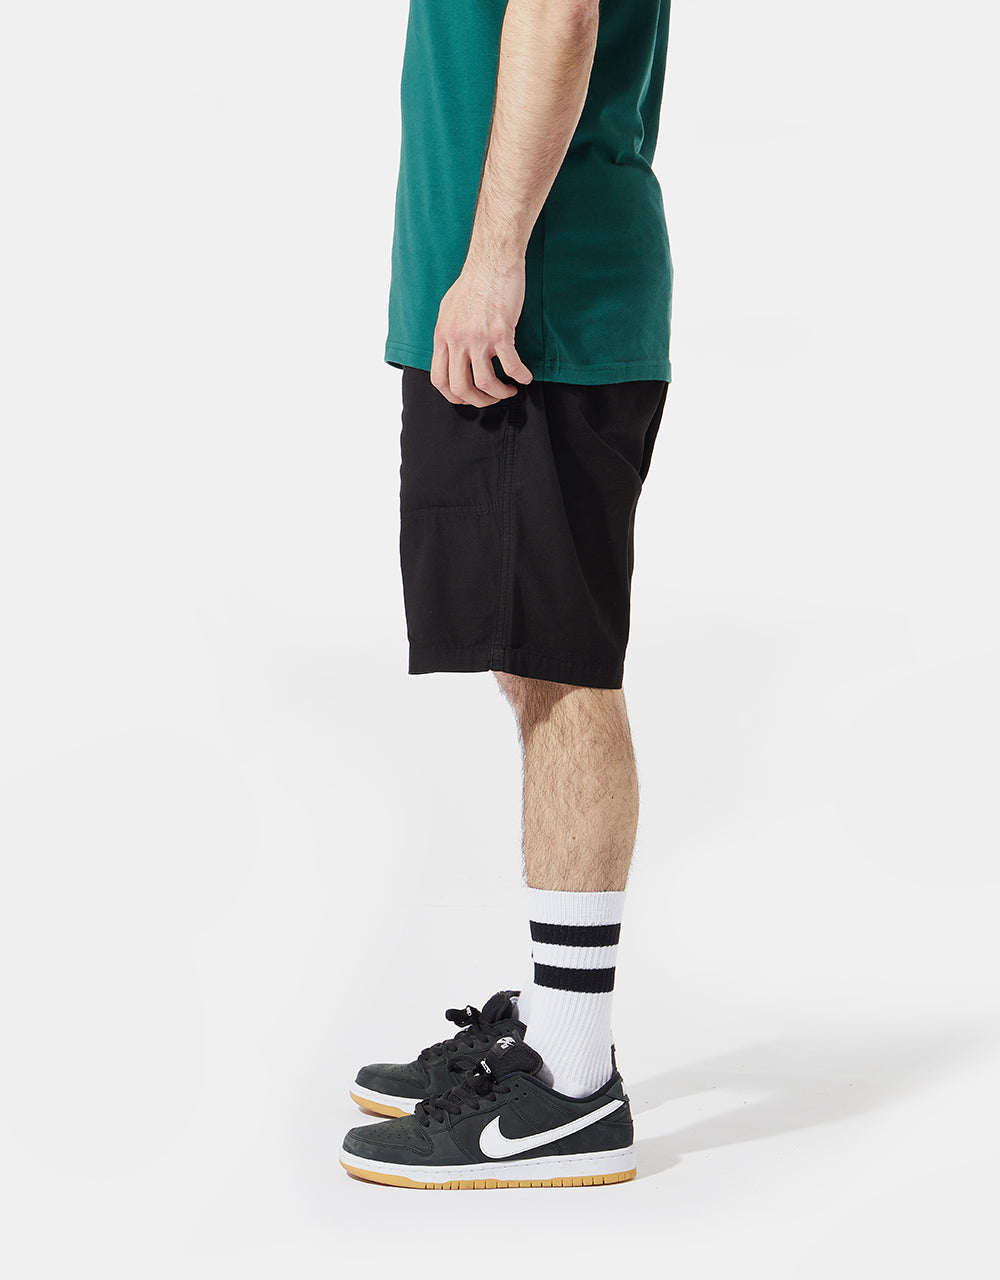 Route One Classic Clip Shorts - Black